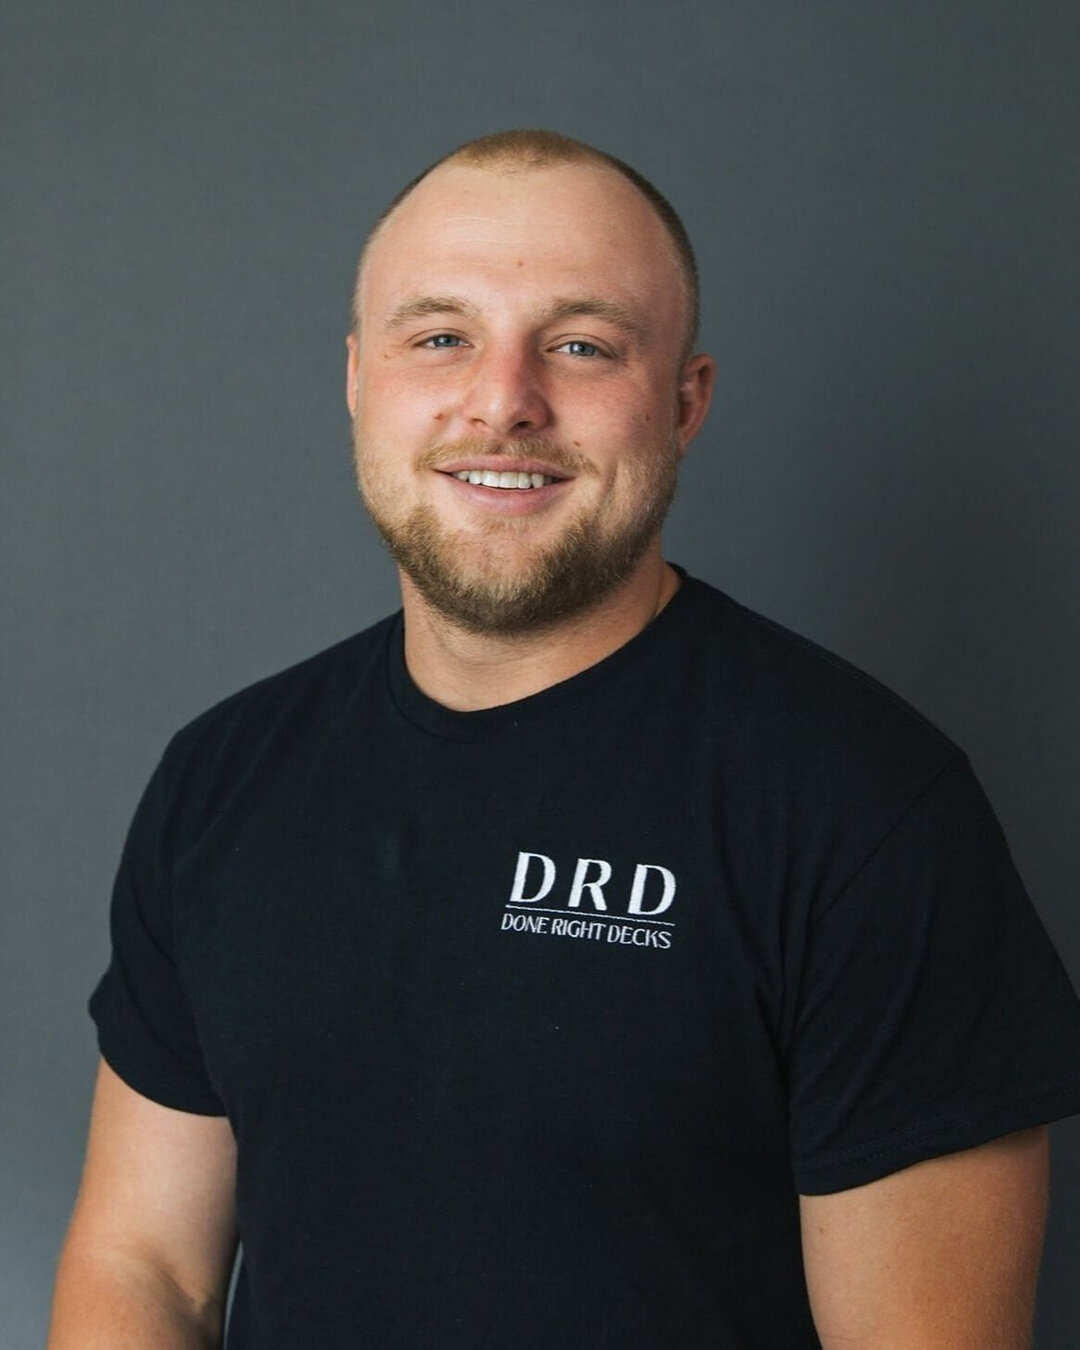 🛠 MEET BRAXTON // FOUNDER + MANAGING DIRECTOR​​​​​​​​
​​​​​​​​
Braxton manages the day-to-day operations from design &amp; sales through management &amp; installation. He cares about his clients and has made clear that integrity and trust are the ke